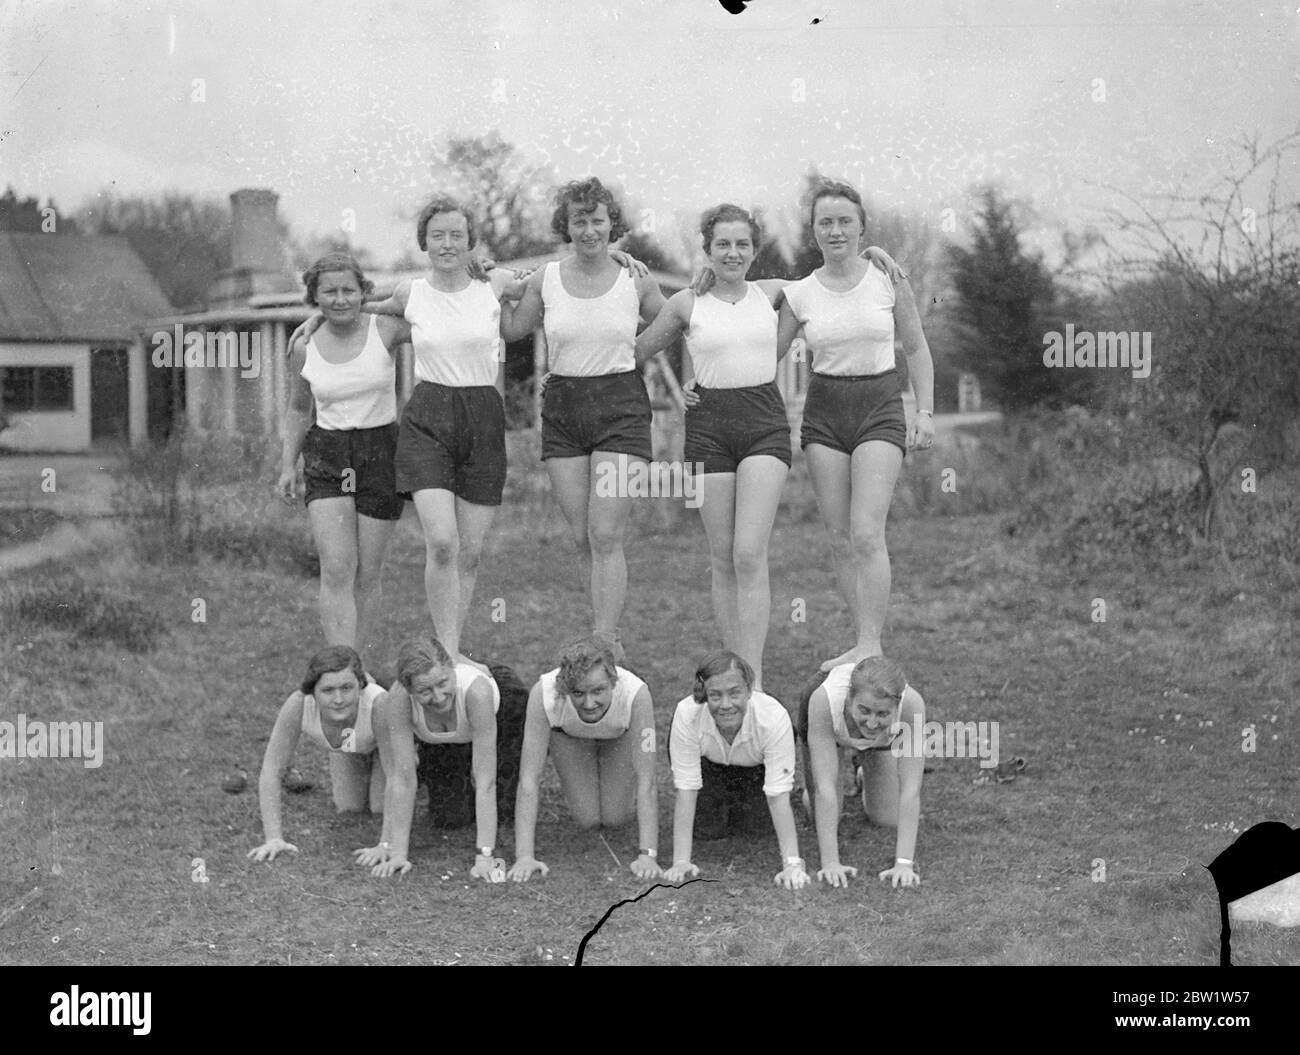 Fräuleins in the New Forest good will camp at Godshill. Girl members of the Hitler Youth Movement - students, clerks and factory hands between the ages of 18 and 25 - are attending a second annual camp organised to promote Anglo - German friendship at Godshill in the New Forest in Hampshire. They are to entertain a party of English girls over the weekend. Young girls from England are attending a similar camp in Germany. Photo shows: the German girls playing games, exercising at the New Forest camp. 10 April 1937 Stock Photo